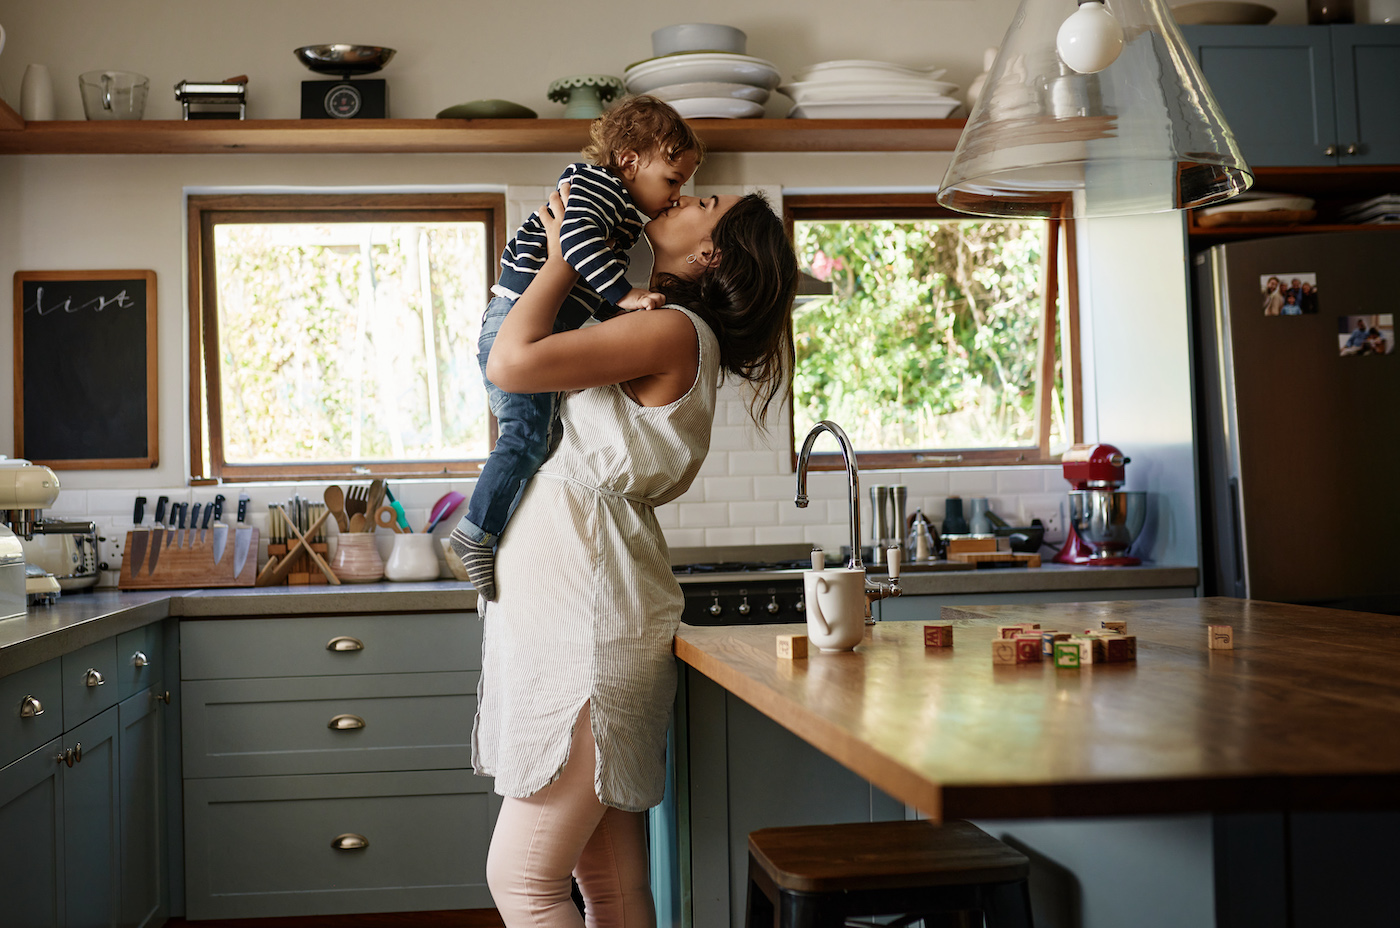 Woman kissing child in the kitchen